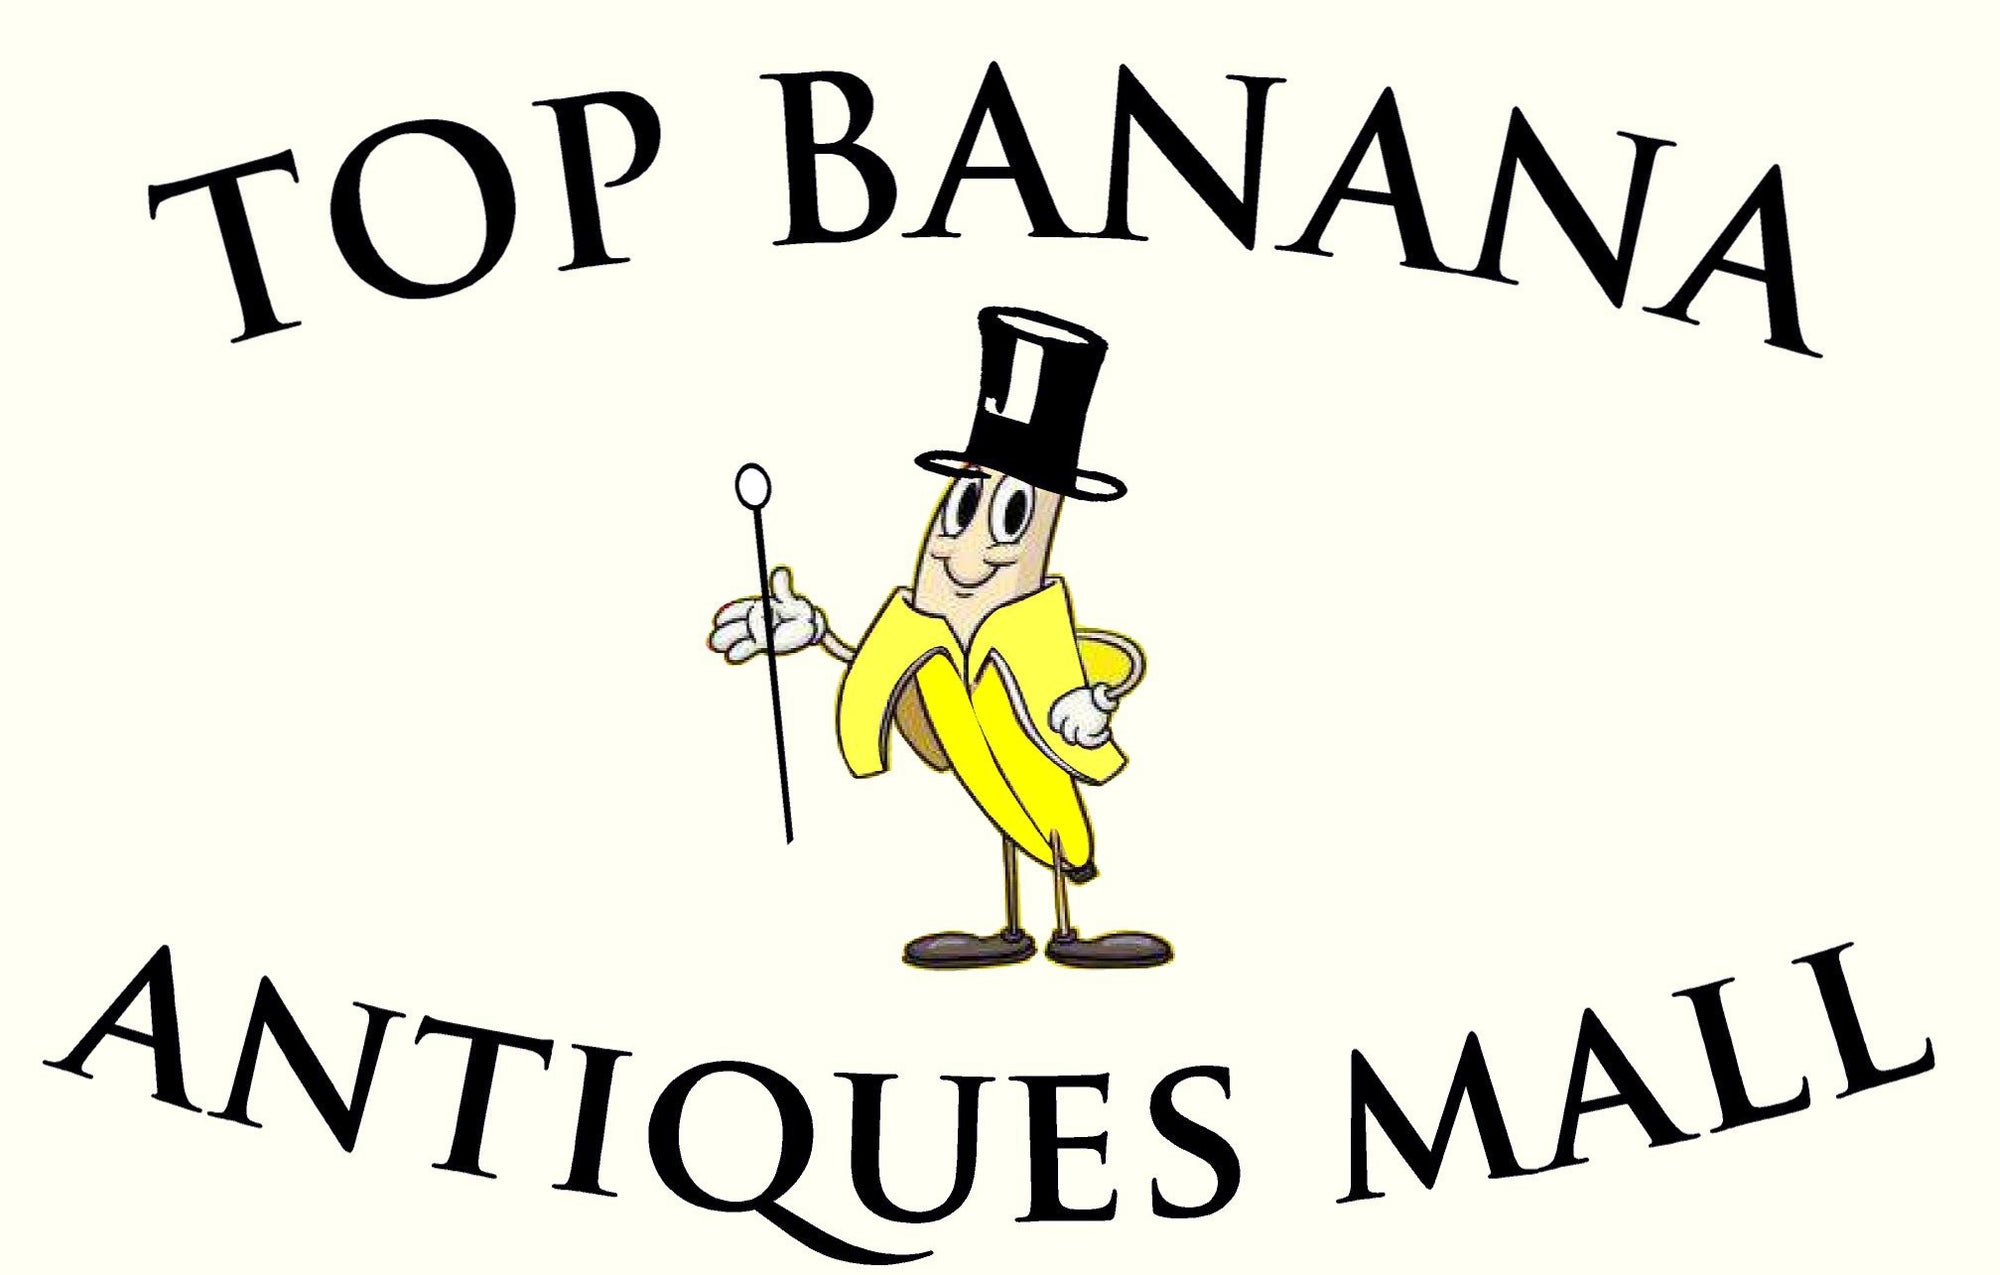 Don't let antiques shops be scary, Top Banana Antiques 50 dealers fun and approachable